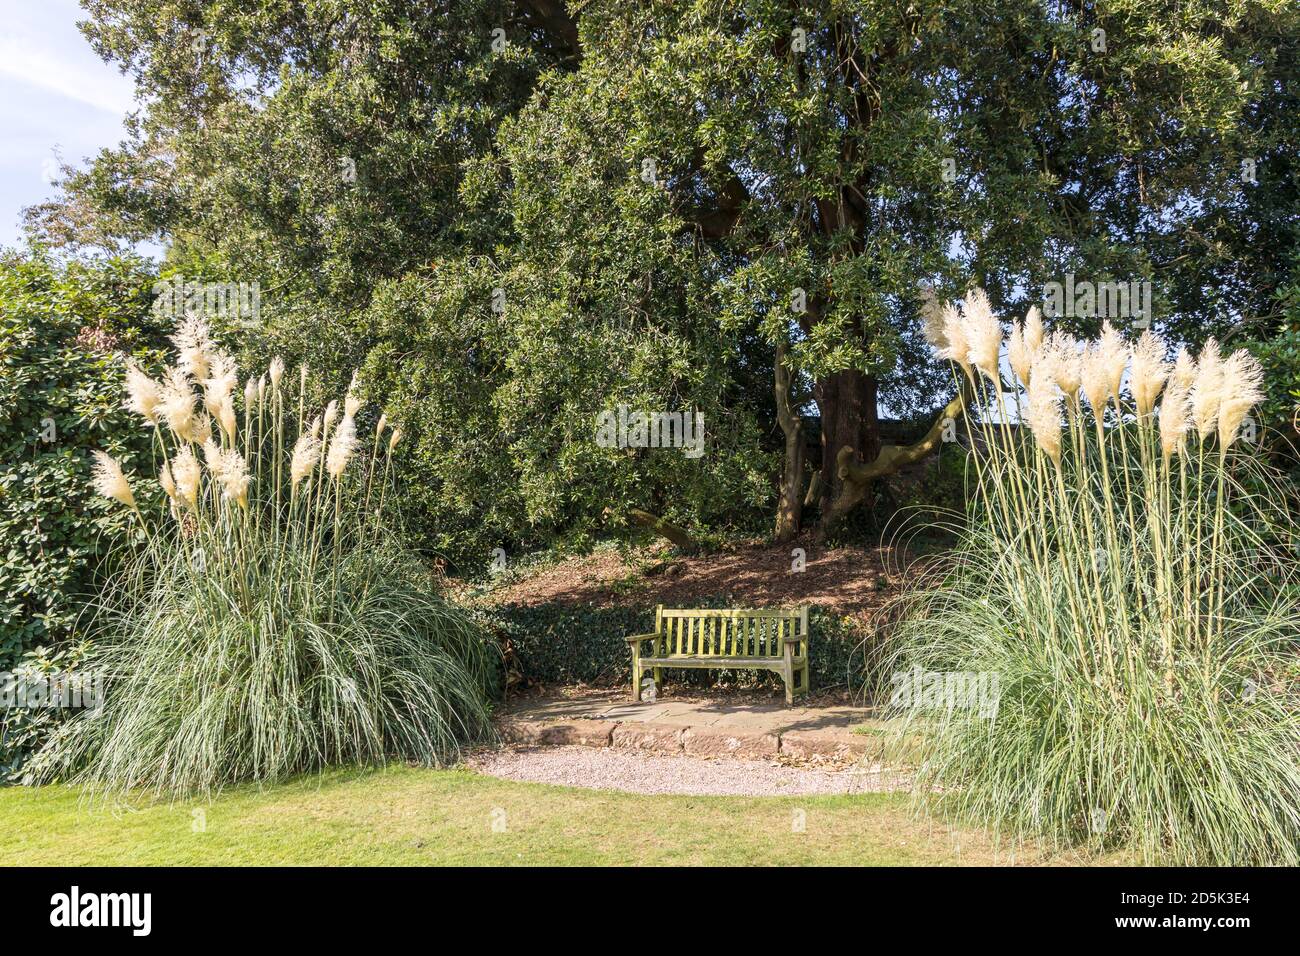 Secluded corner in a park with wooden bench framed by tall pampas grass Cortaderia selloana. Stock Photo